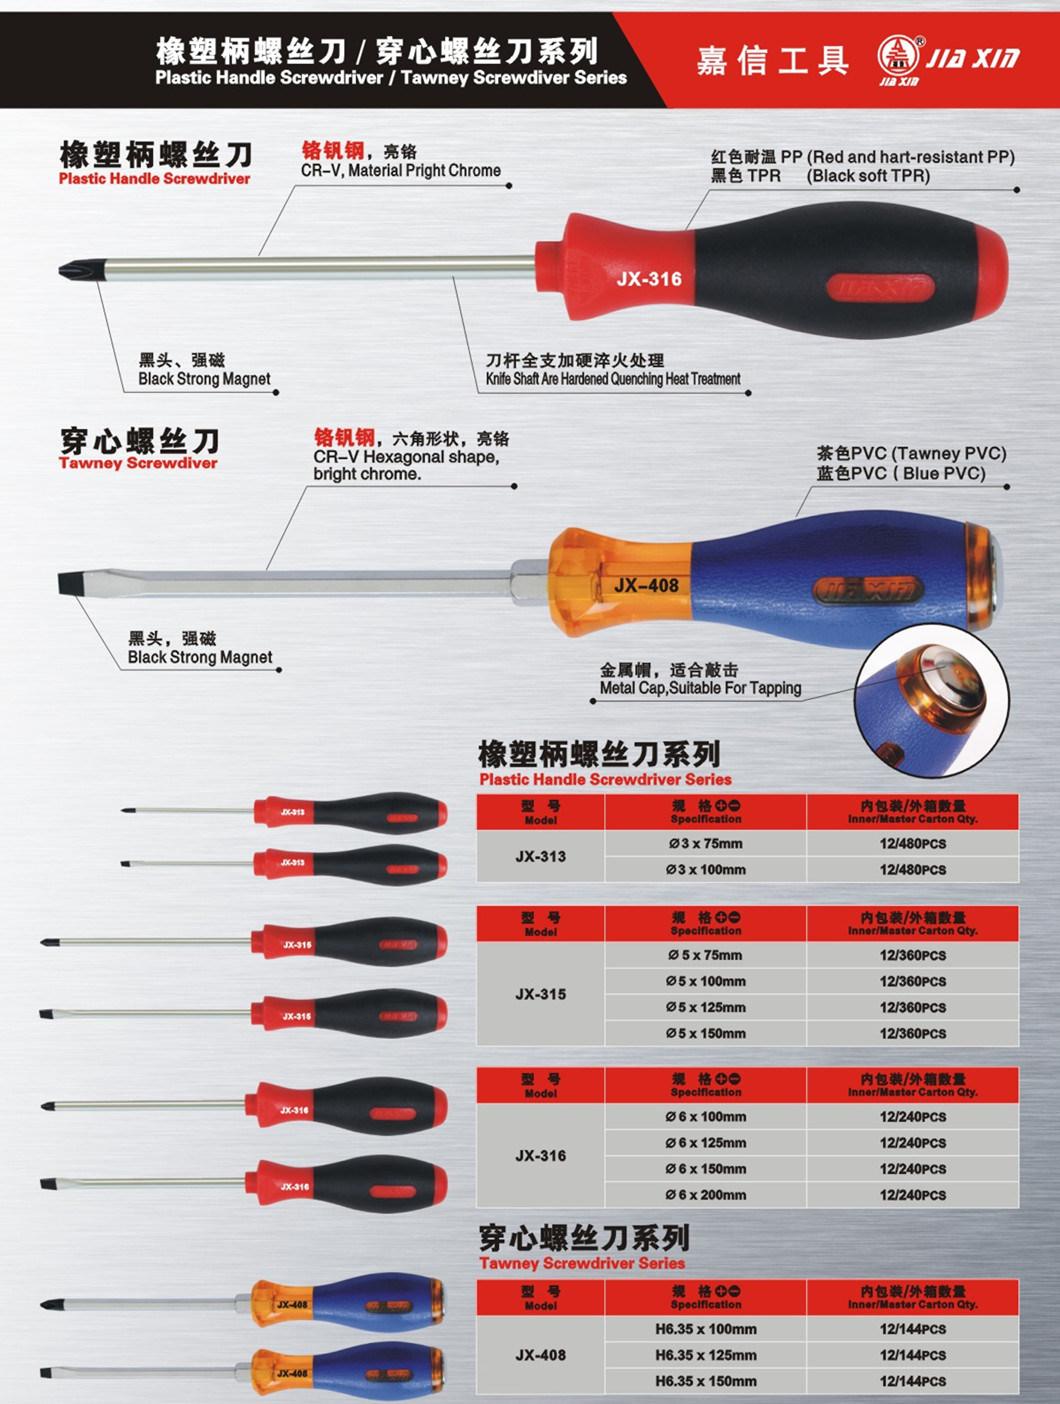 OEM Can Be Customized Brand Packaging of High Quality Screwdrivers